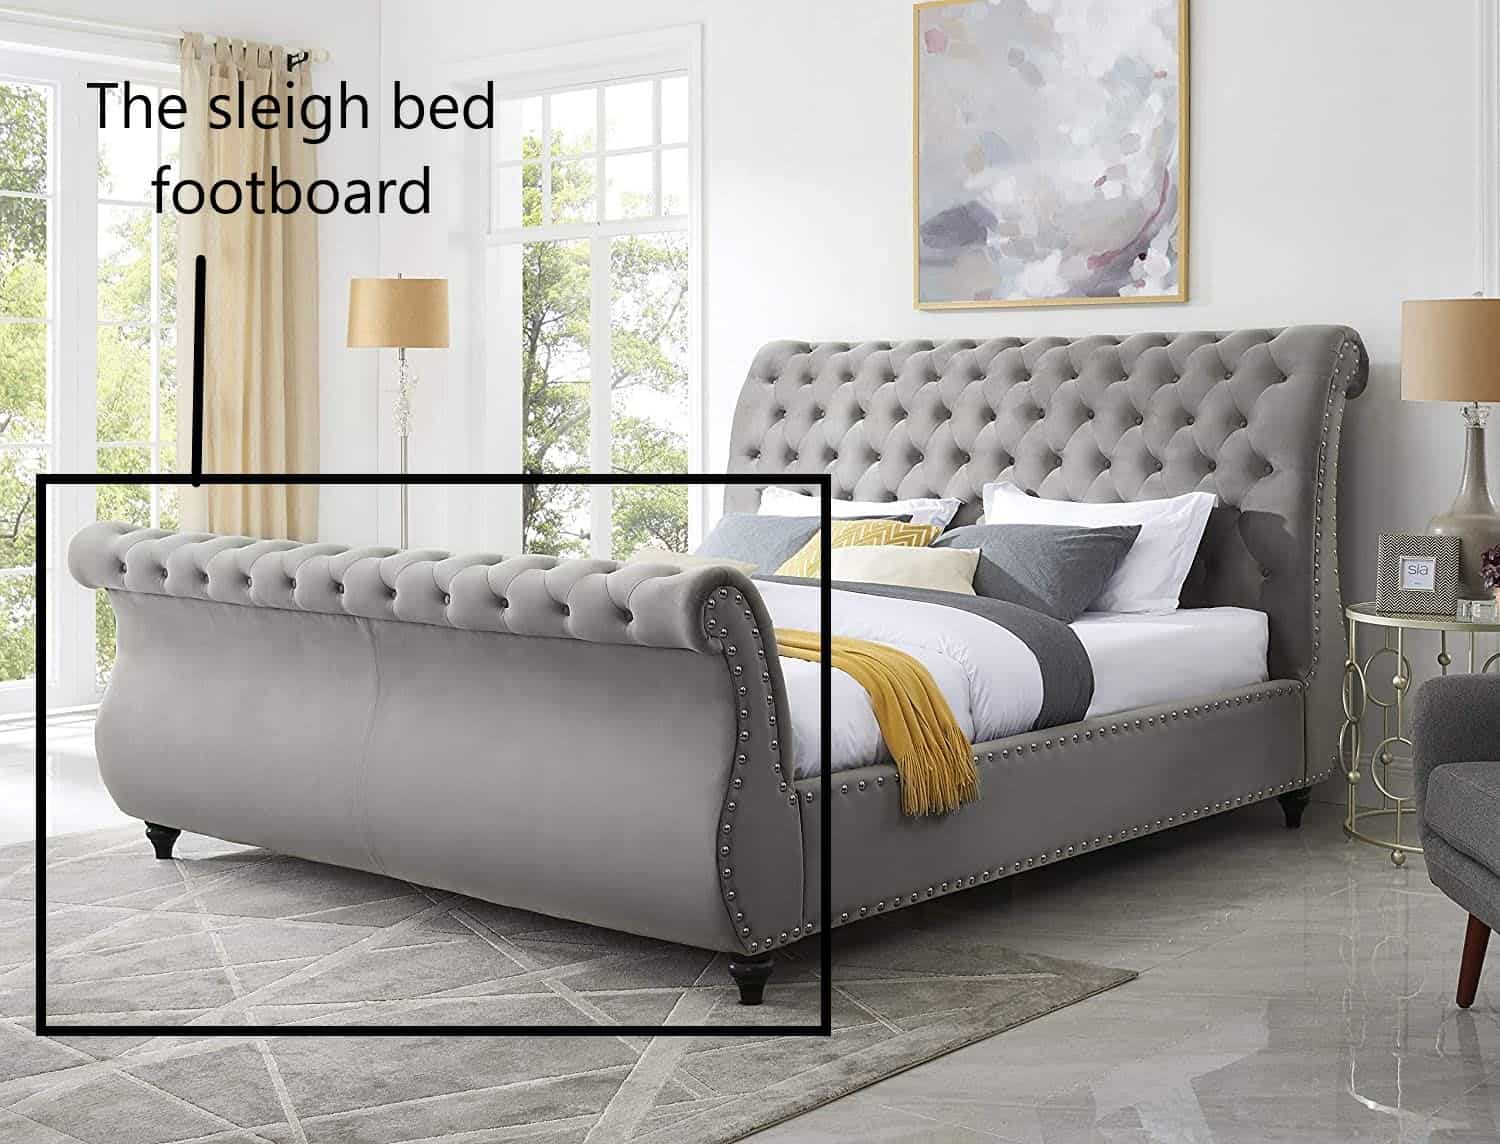 How To Replace A Sleigh Bed Footboard, How To Remove A Bed Frame